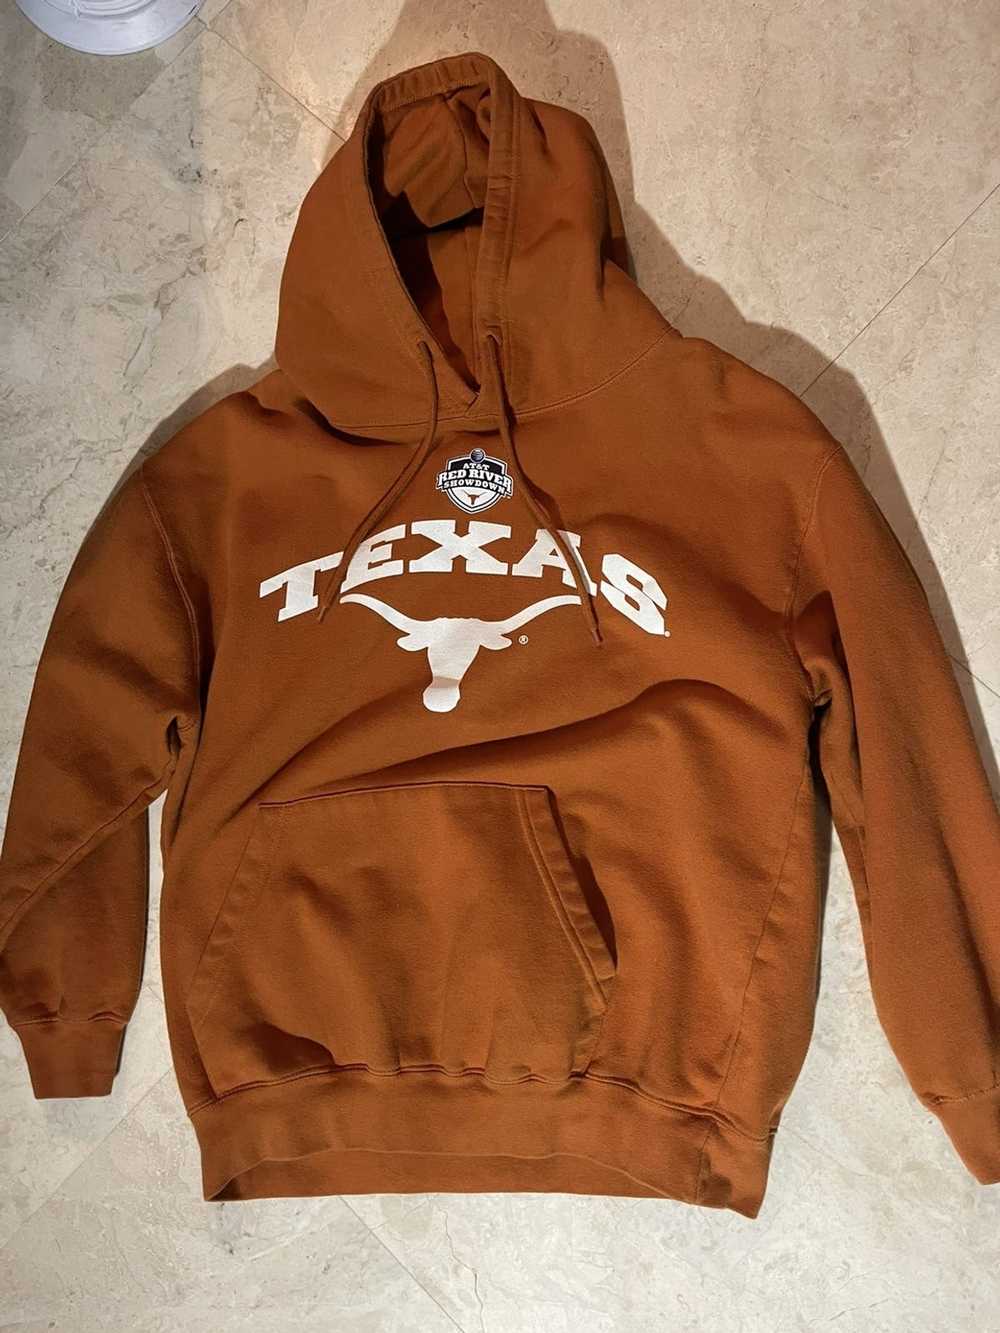 American College texas collage hoodie at&t sponsor - image 1